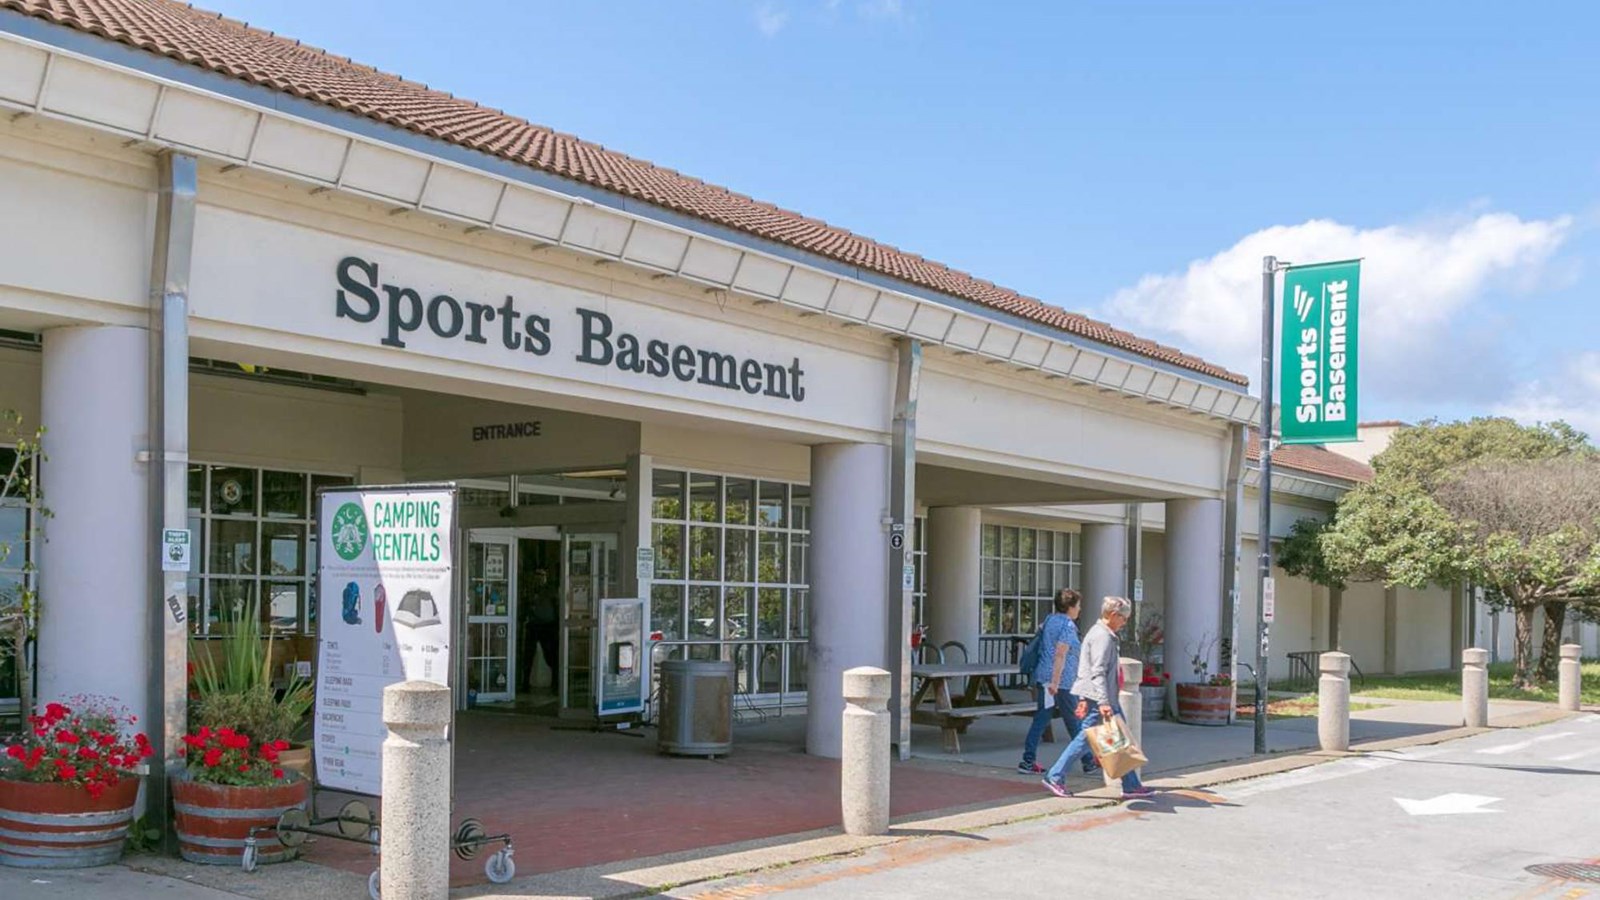 The entrance to Sports Basement